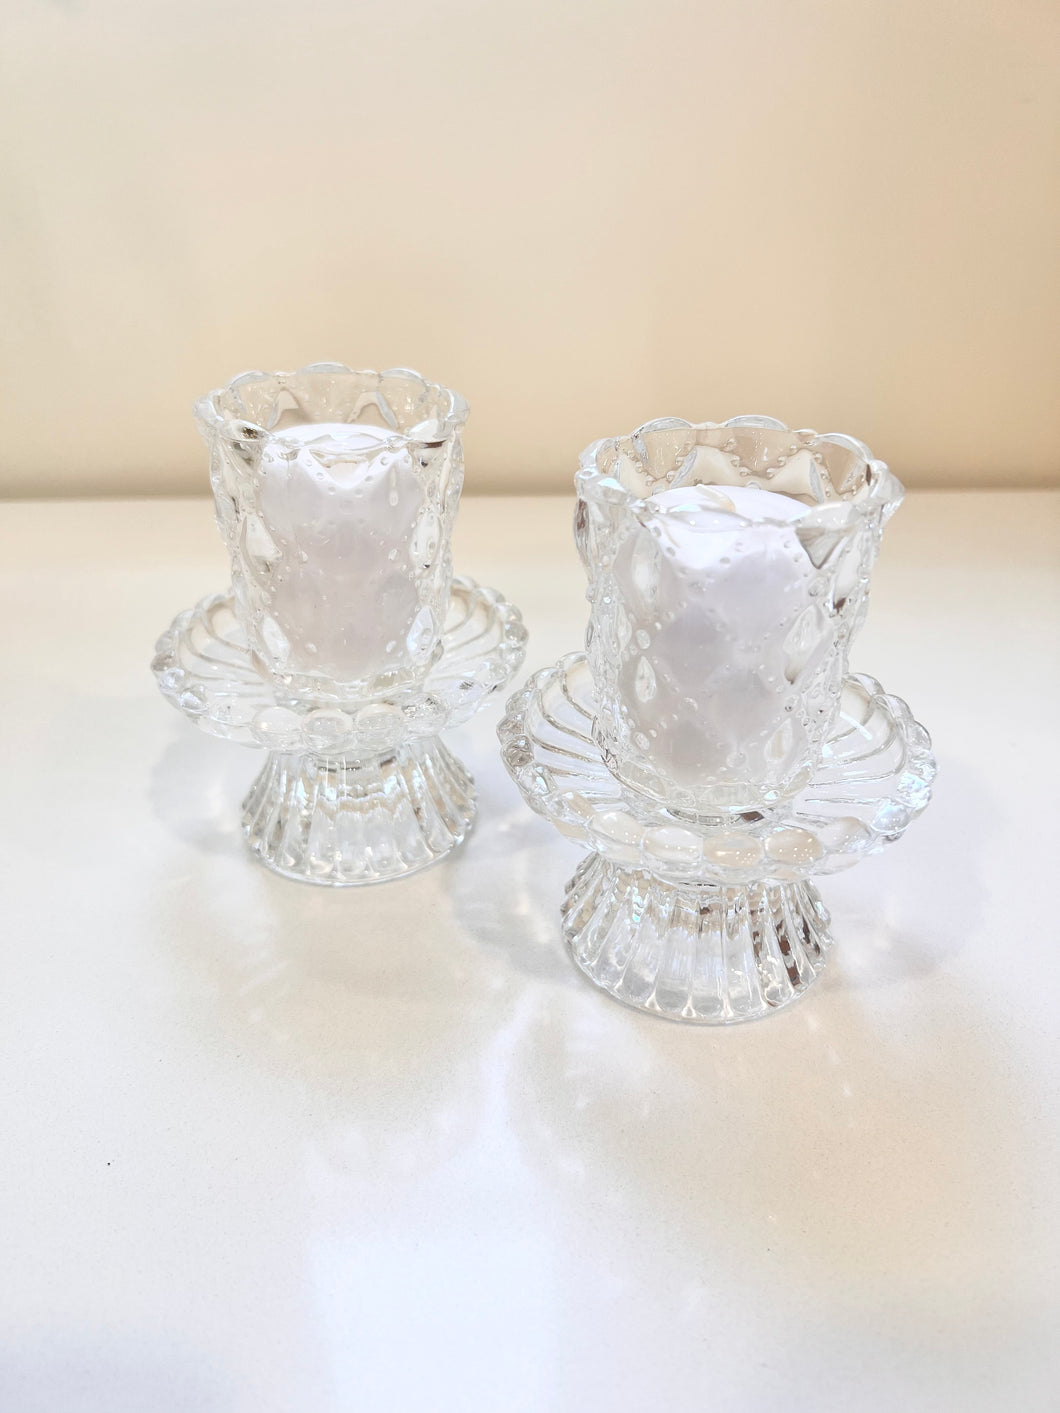 Glass tealight candle holders/votives